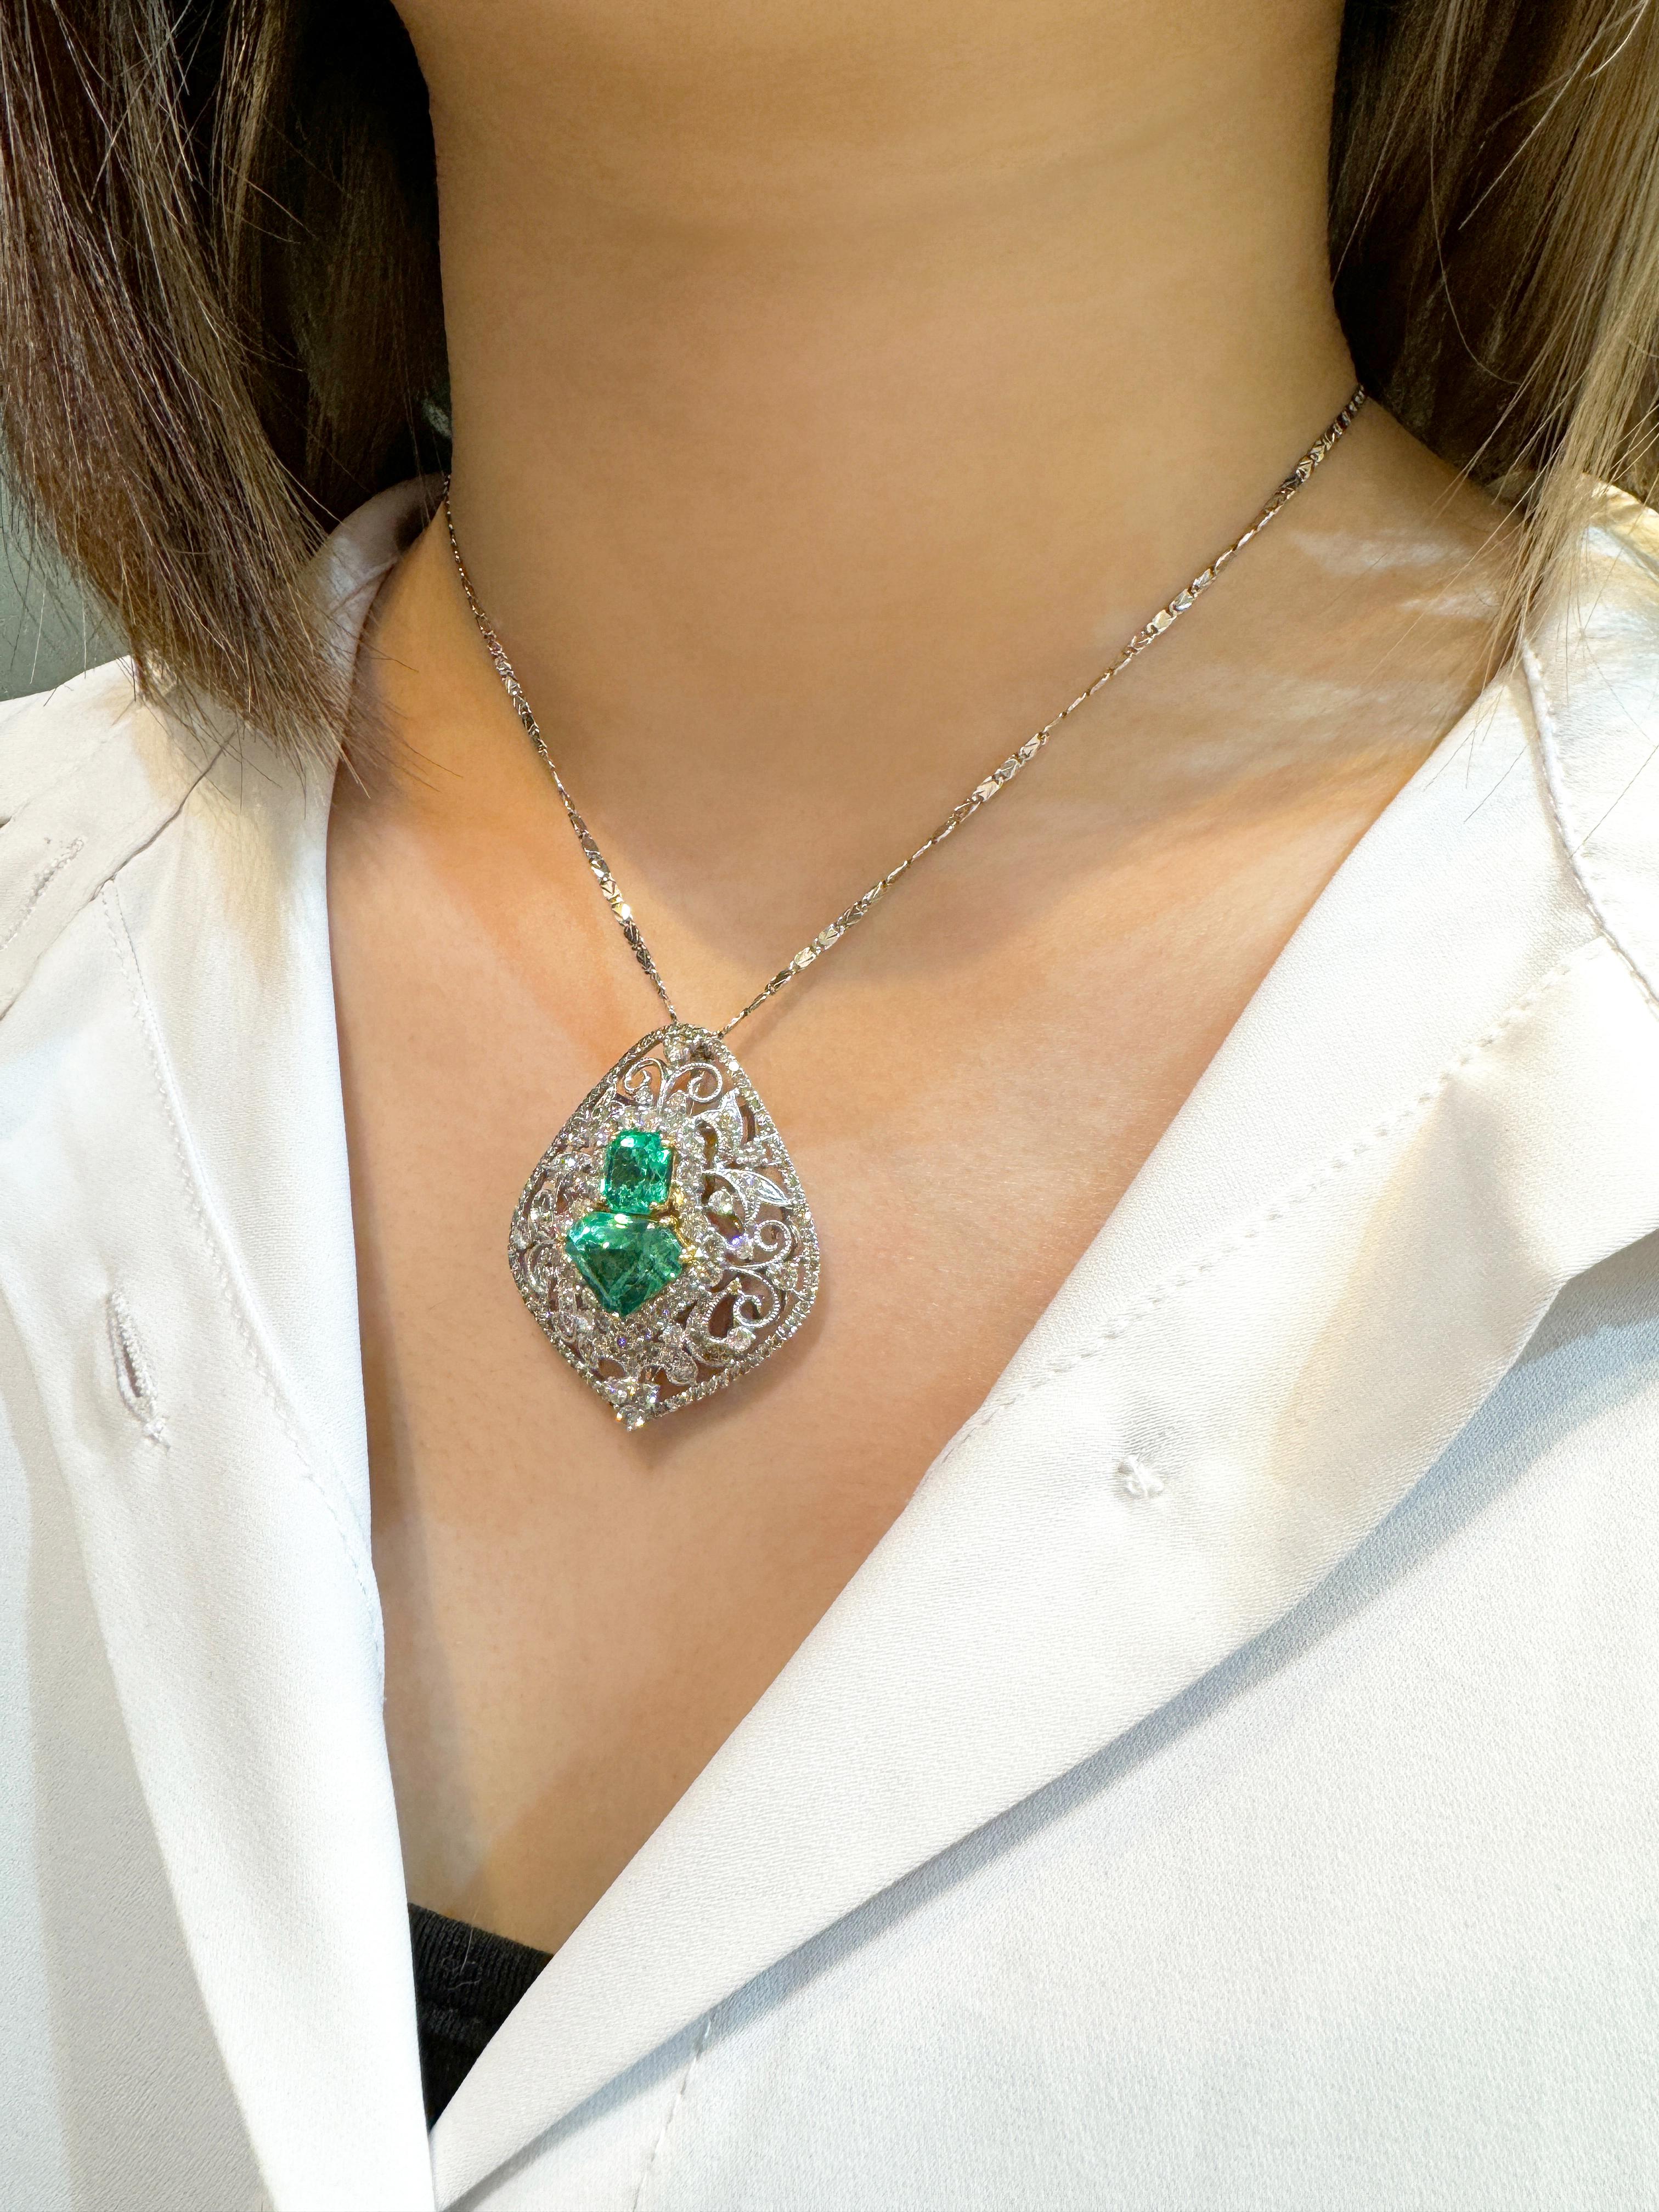 Vintage Carved 18K White Gold Pendant Necklace With Shield Cut Emeralds For Sale 2